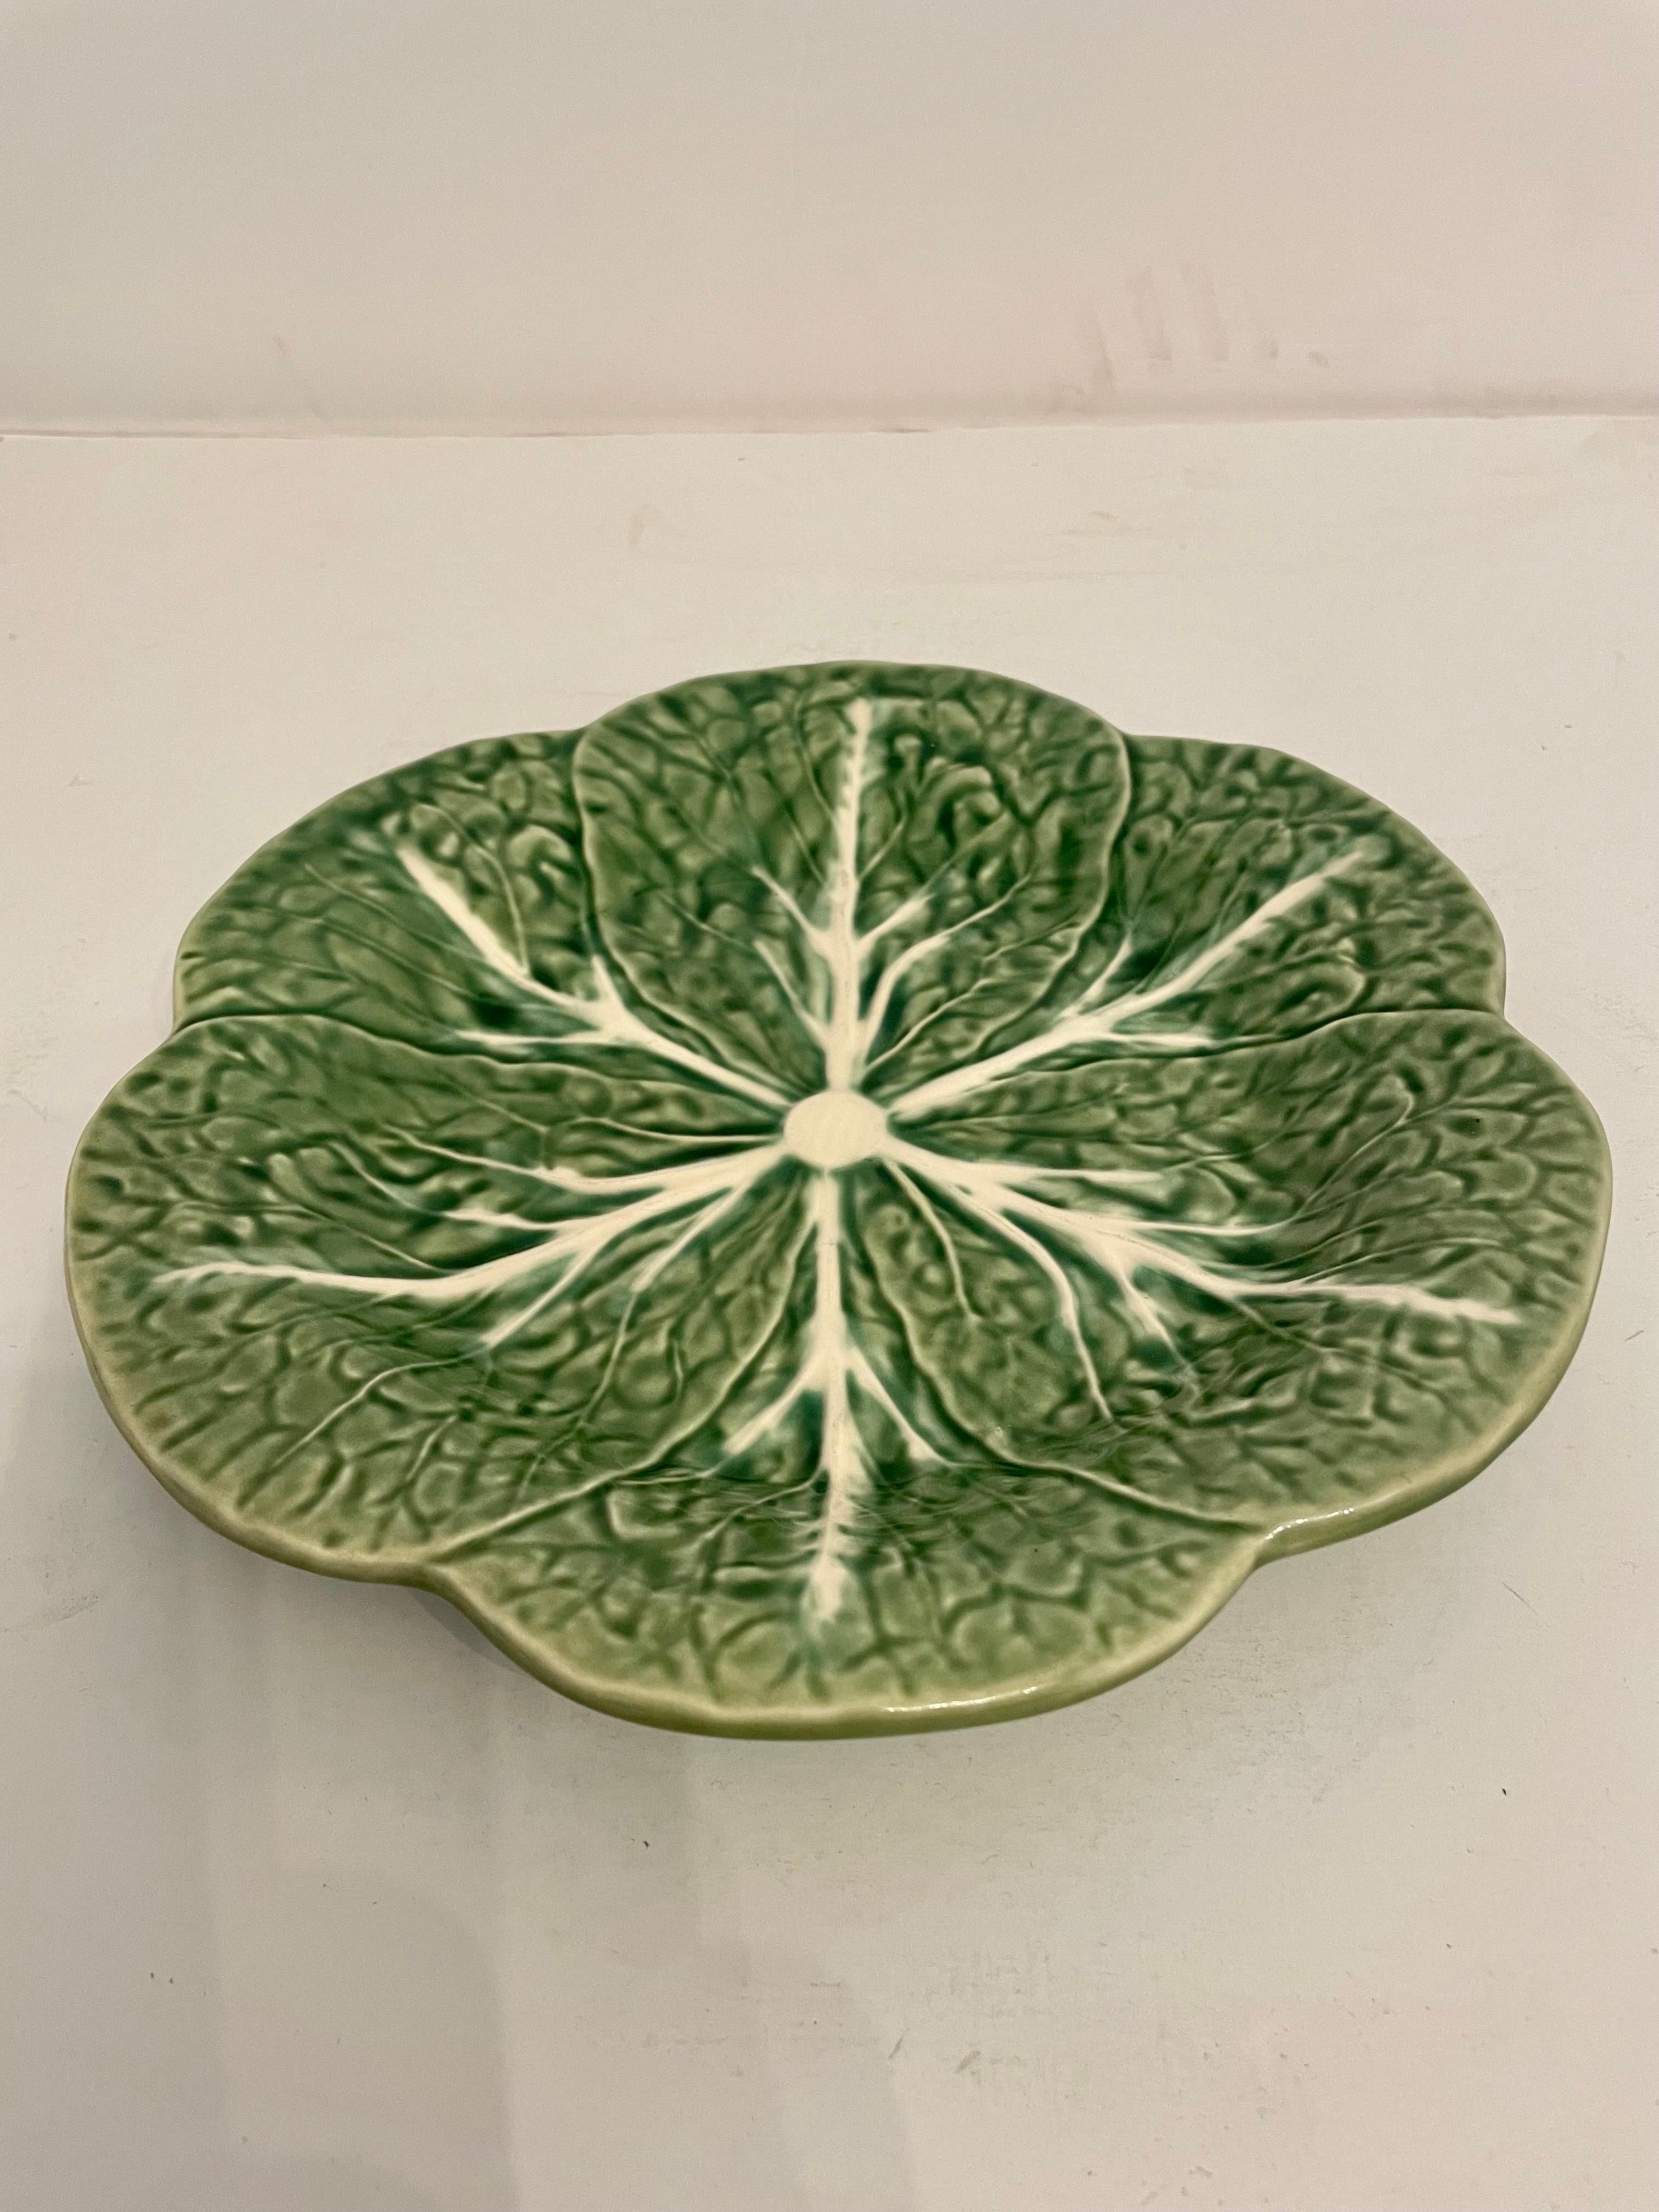 Palm Beach style Set Of Eight Cabbage Pattern Dessert Plates by Bordallo Pinheiro, Portugal. Stamped on back. Nice size at  9.5